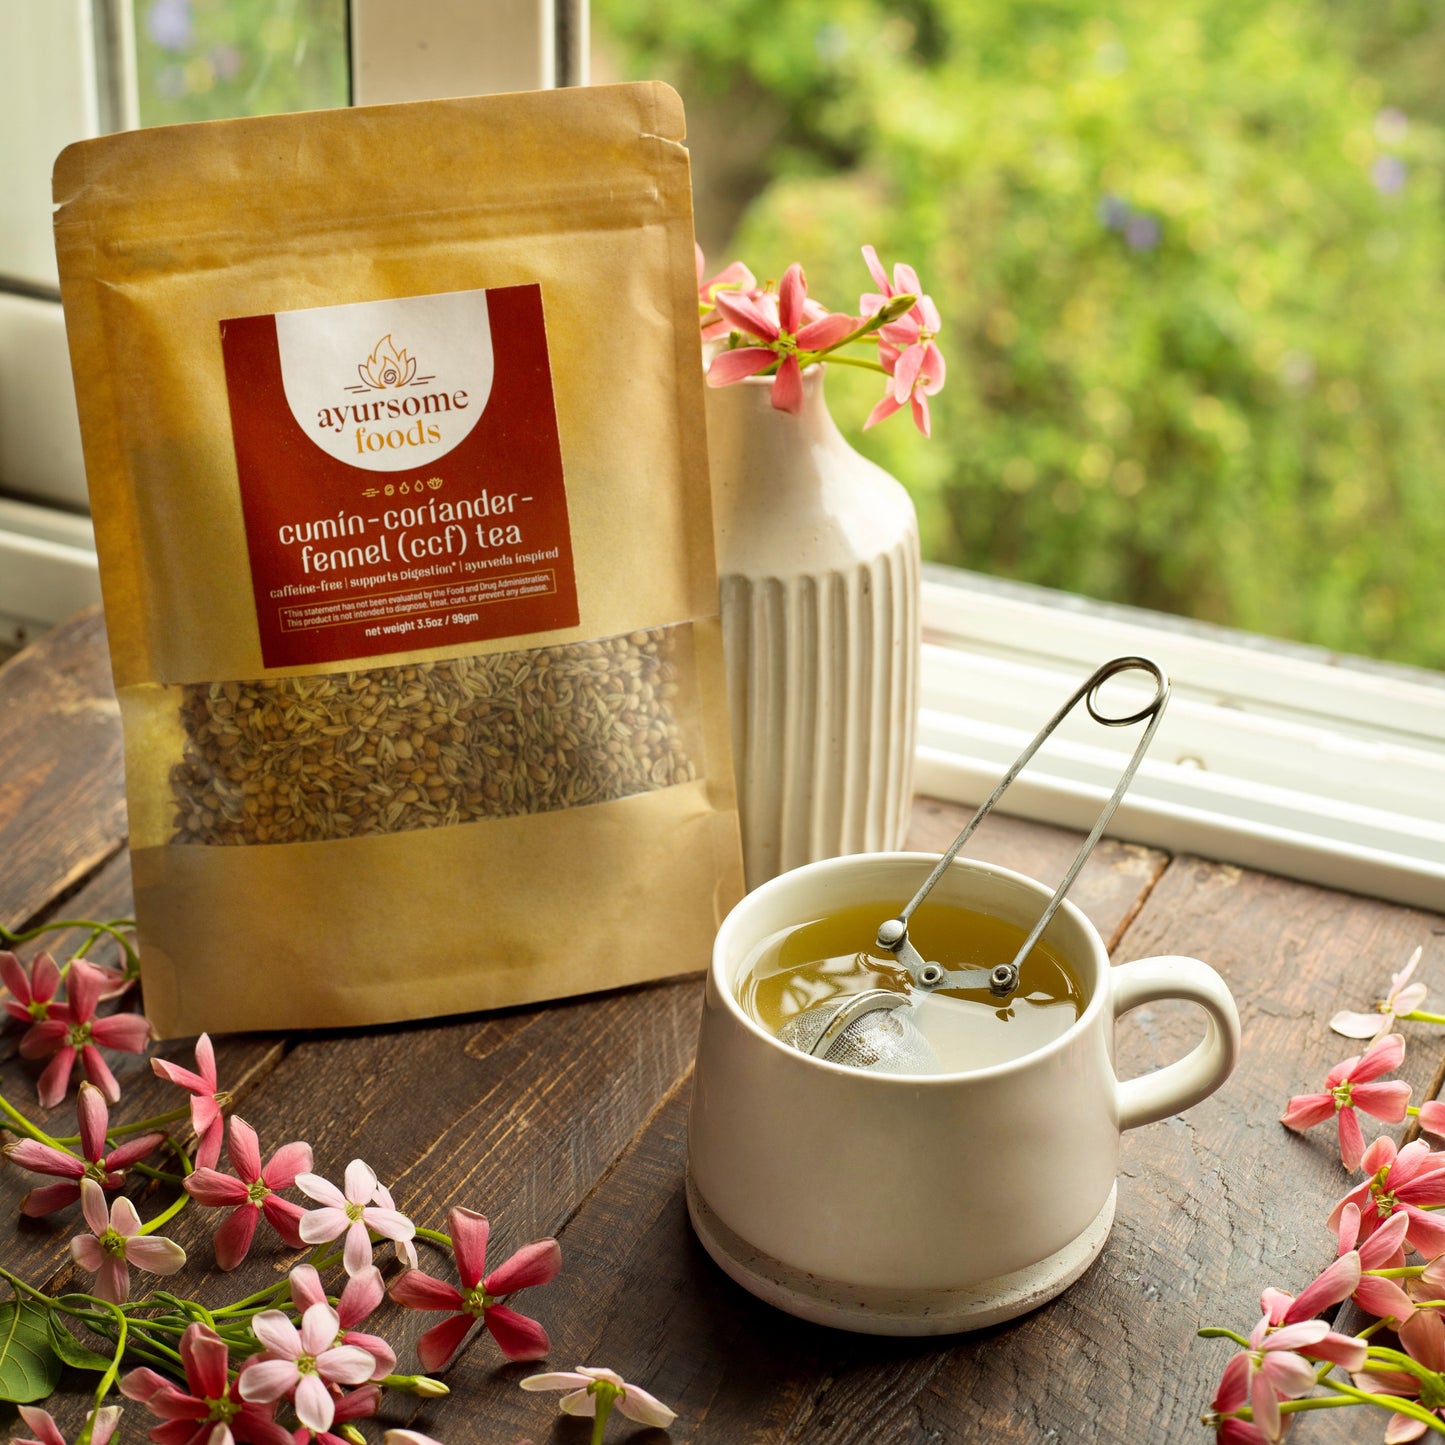 Ayurvedic CCF Tea packed in recyclable brown Kraft paper bag, with a white cup of brewed CCF tea and a tea infuser in the cup, a small white vase with pink flowers and some pink flowers on the window brown sill.